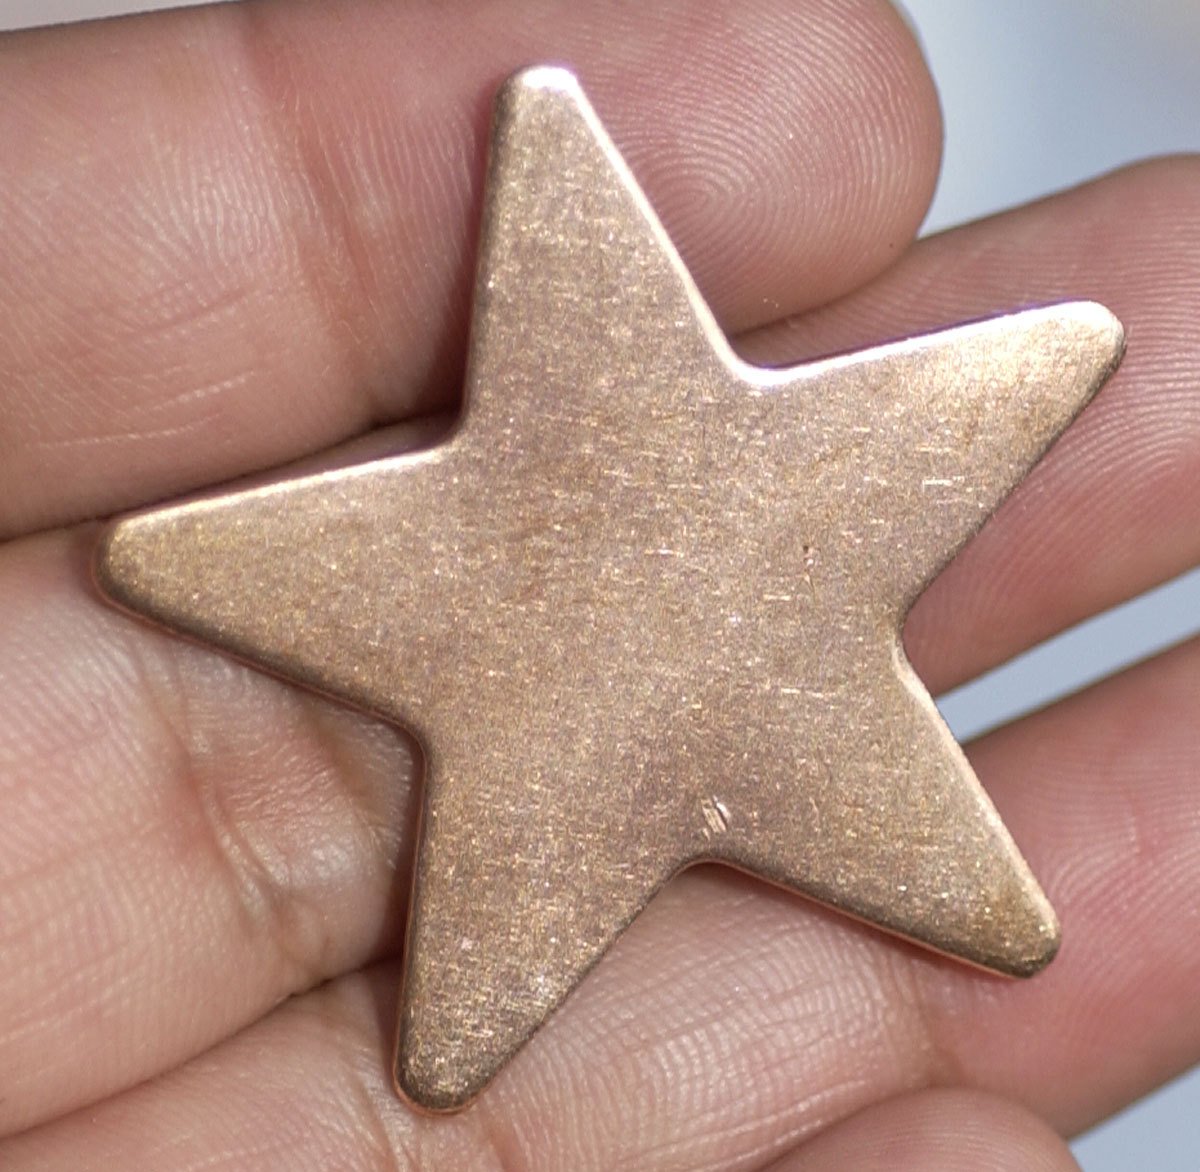 Copper Stars Blanks 20g 36mm Cutout for Enameling Metalworking Polished Blanks - 5 pieces